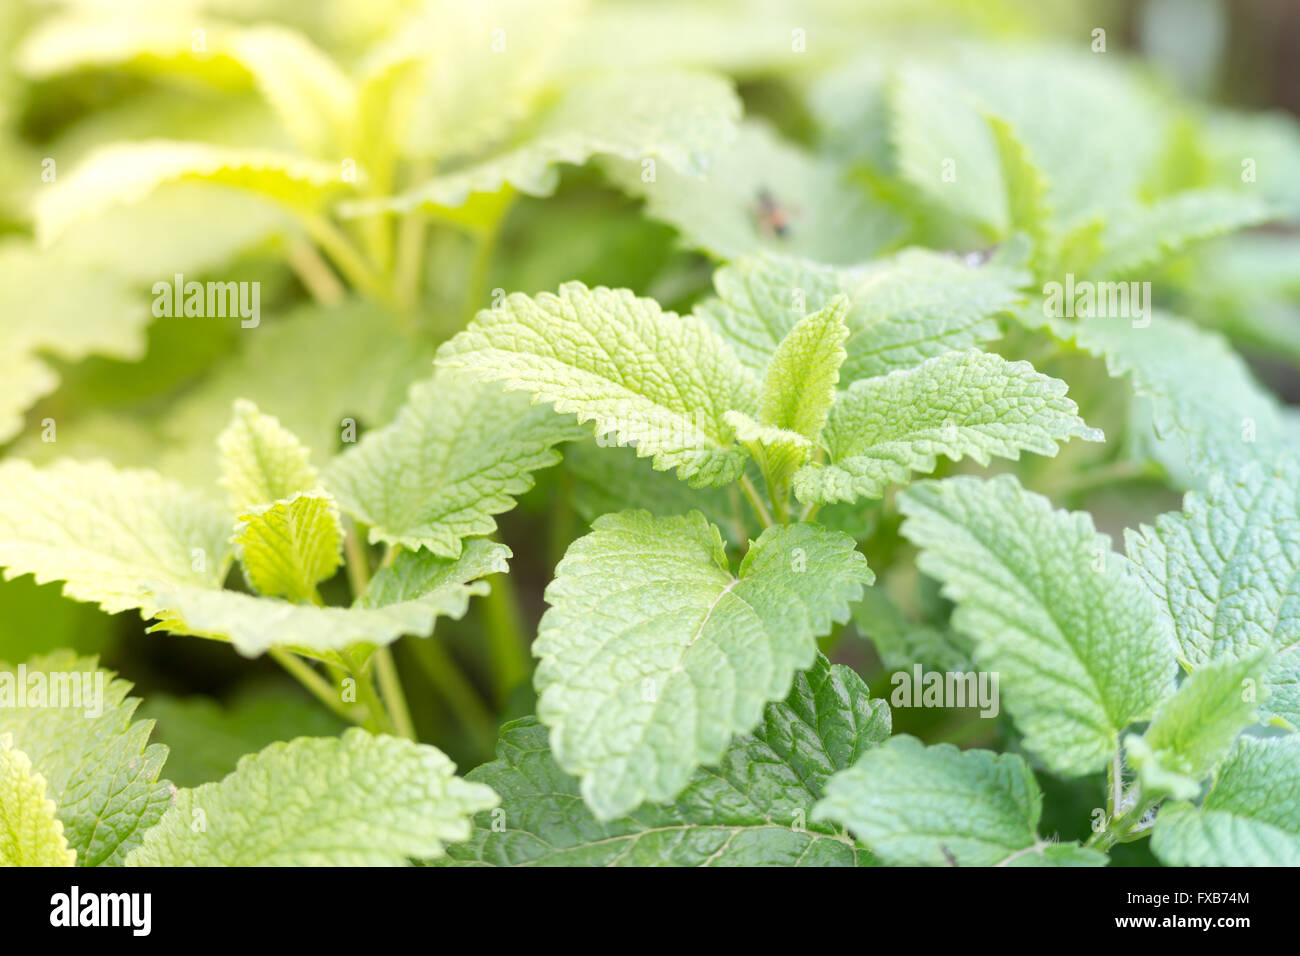 Natural growth in the garden, life concepts Stock Photo